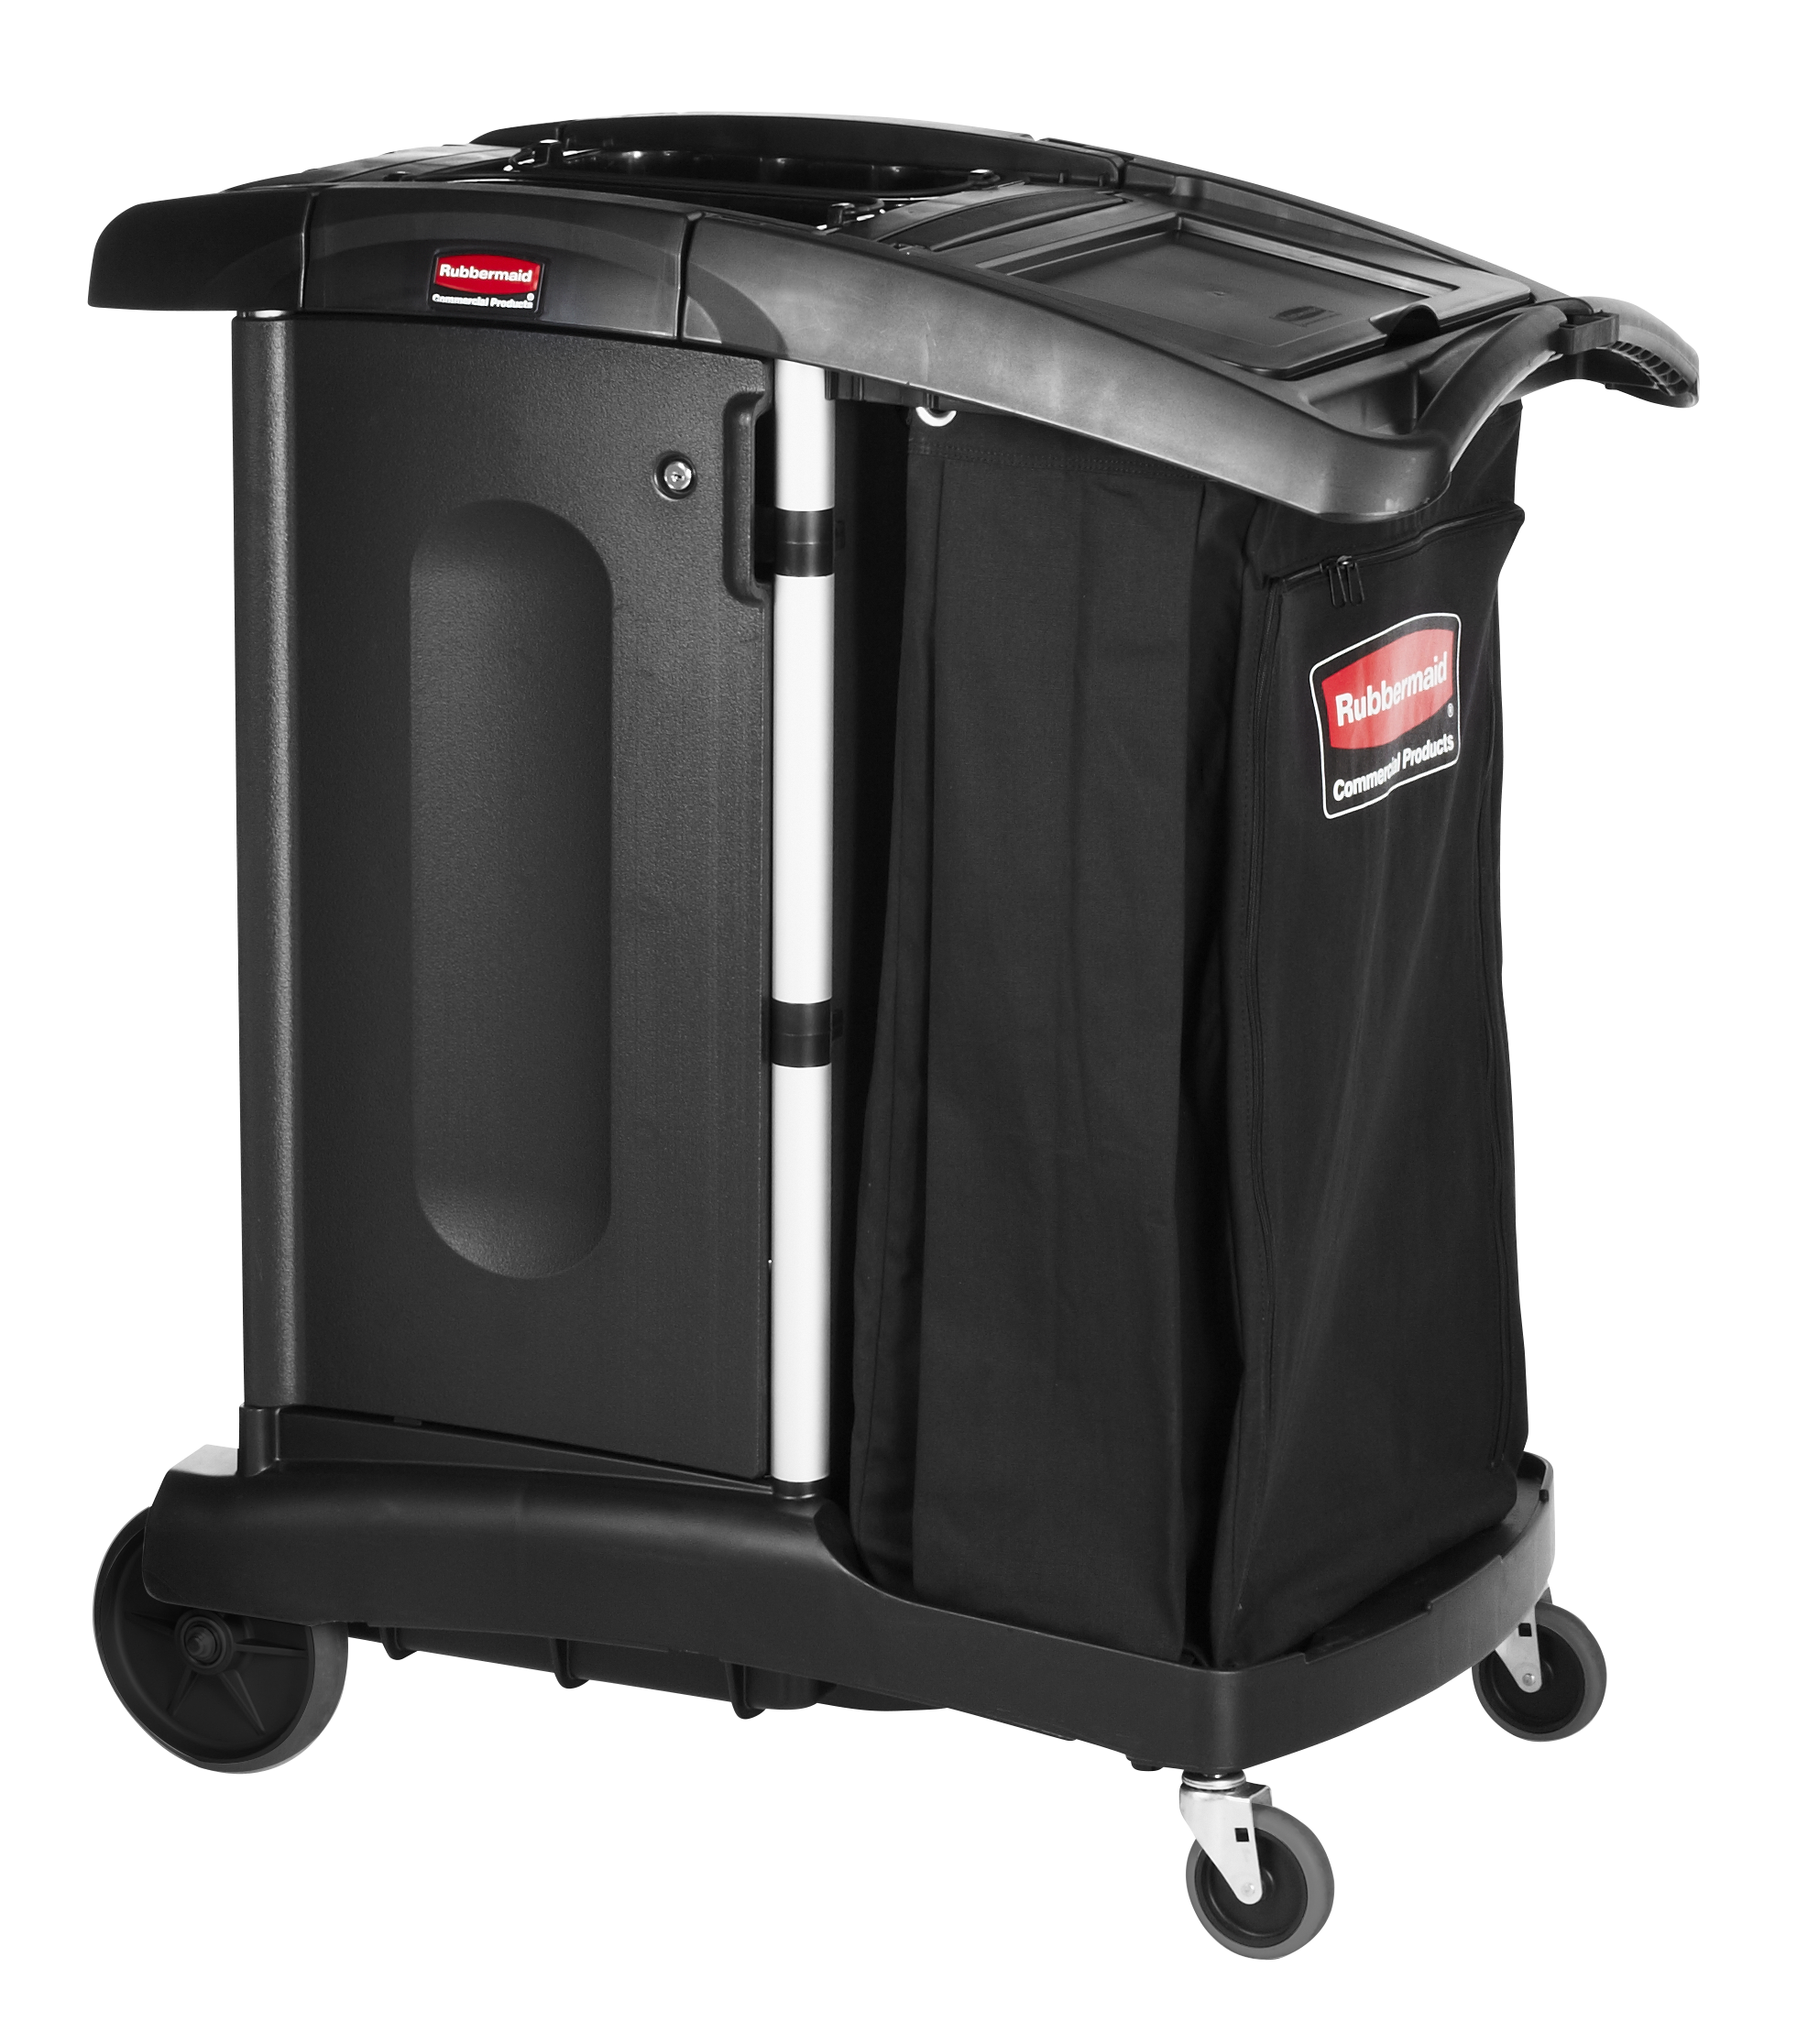 Extra Tall Full-Size Housekeeping Cart